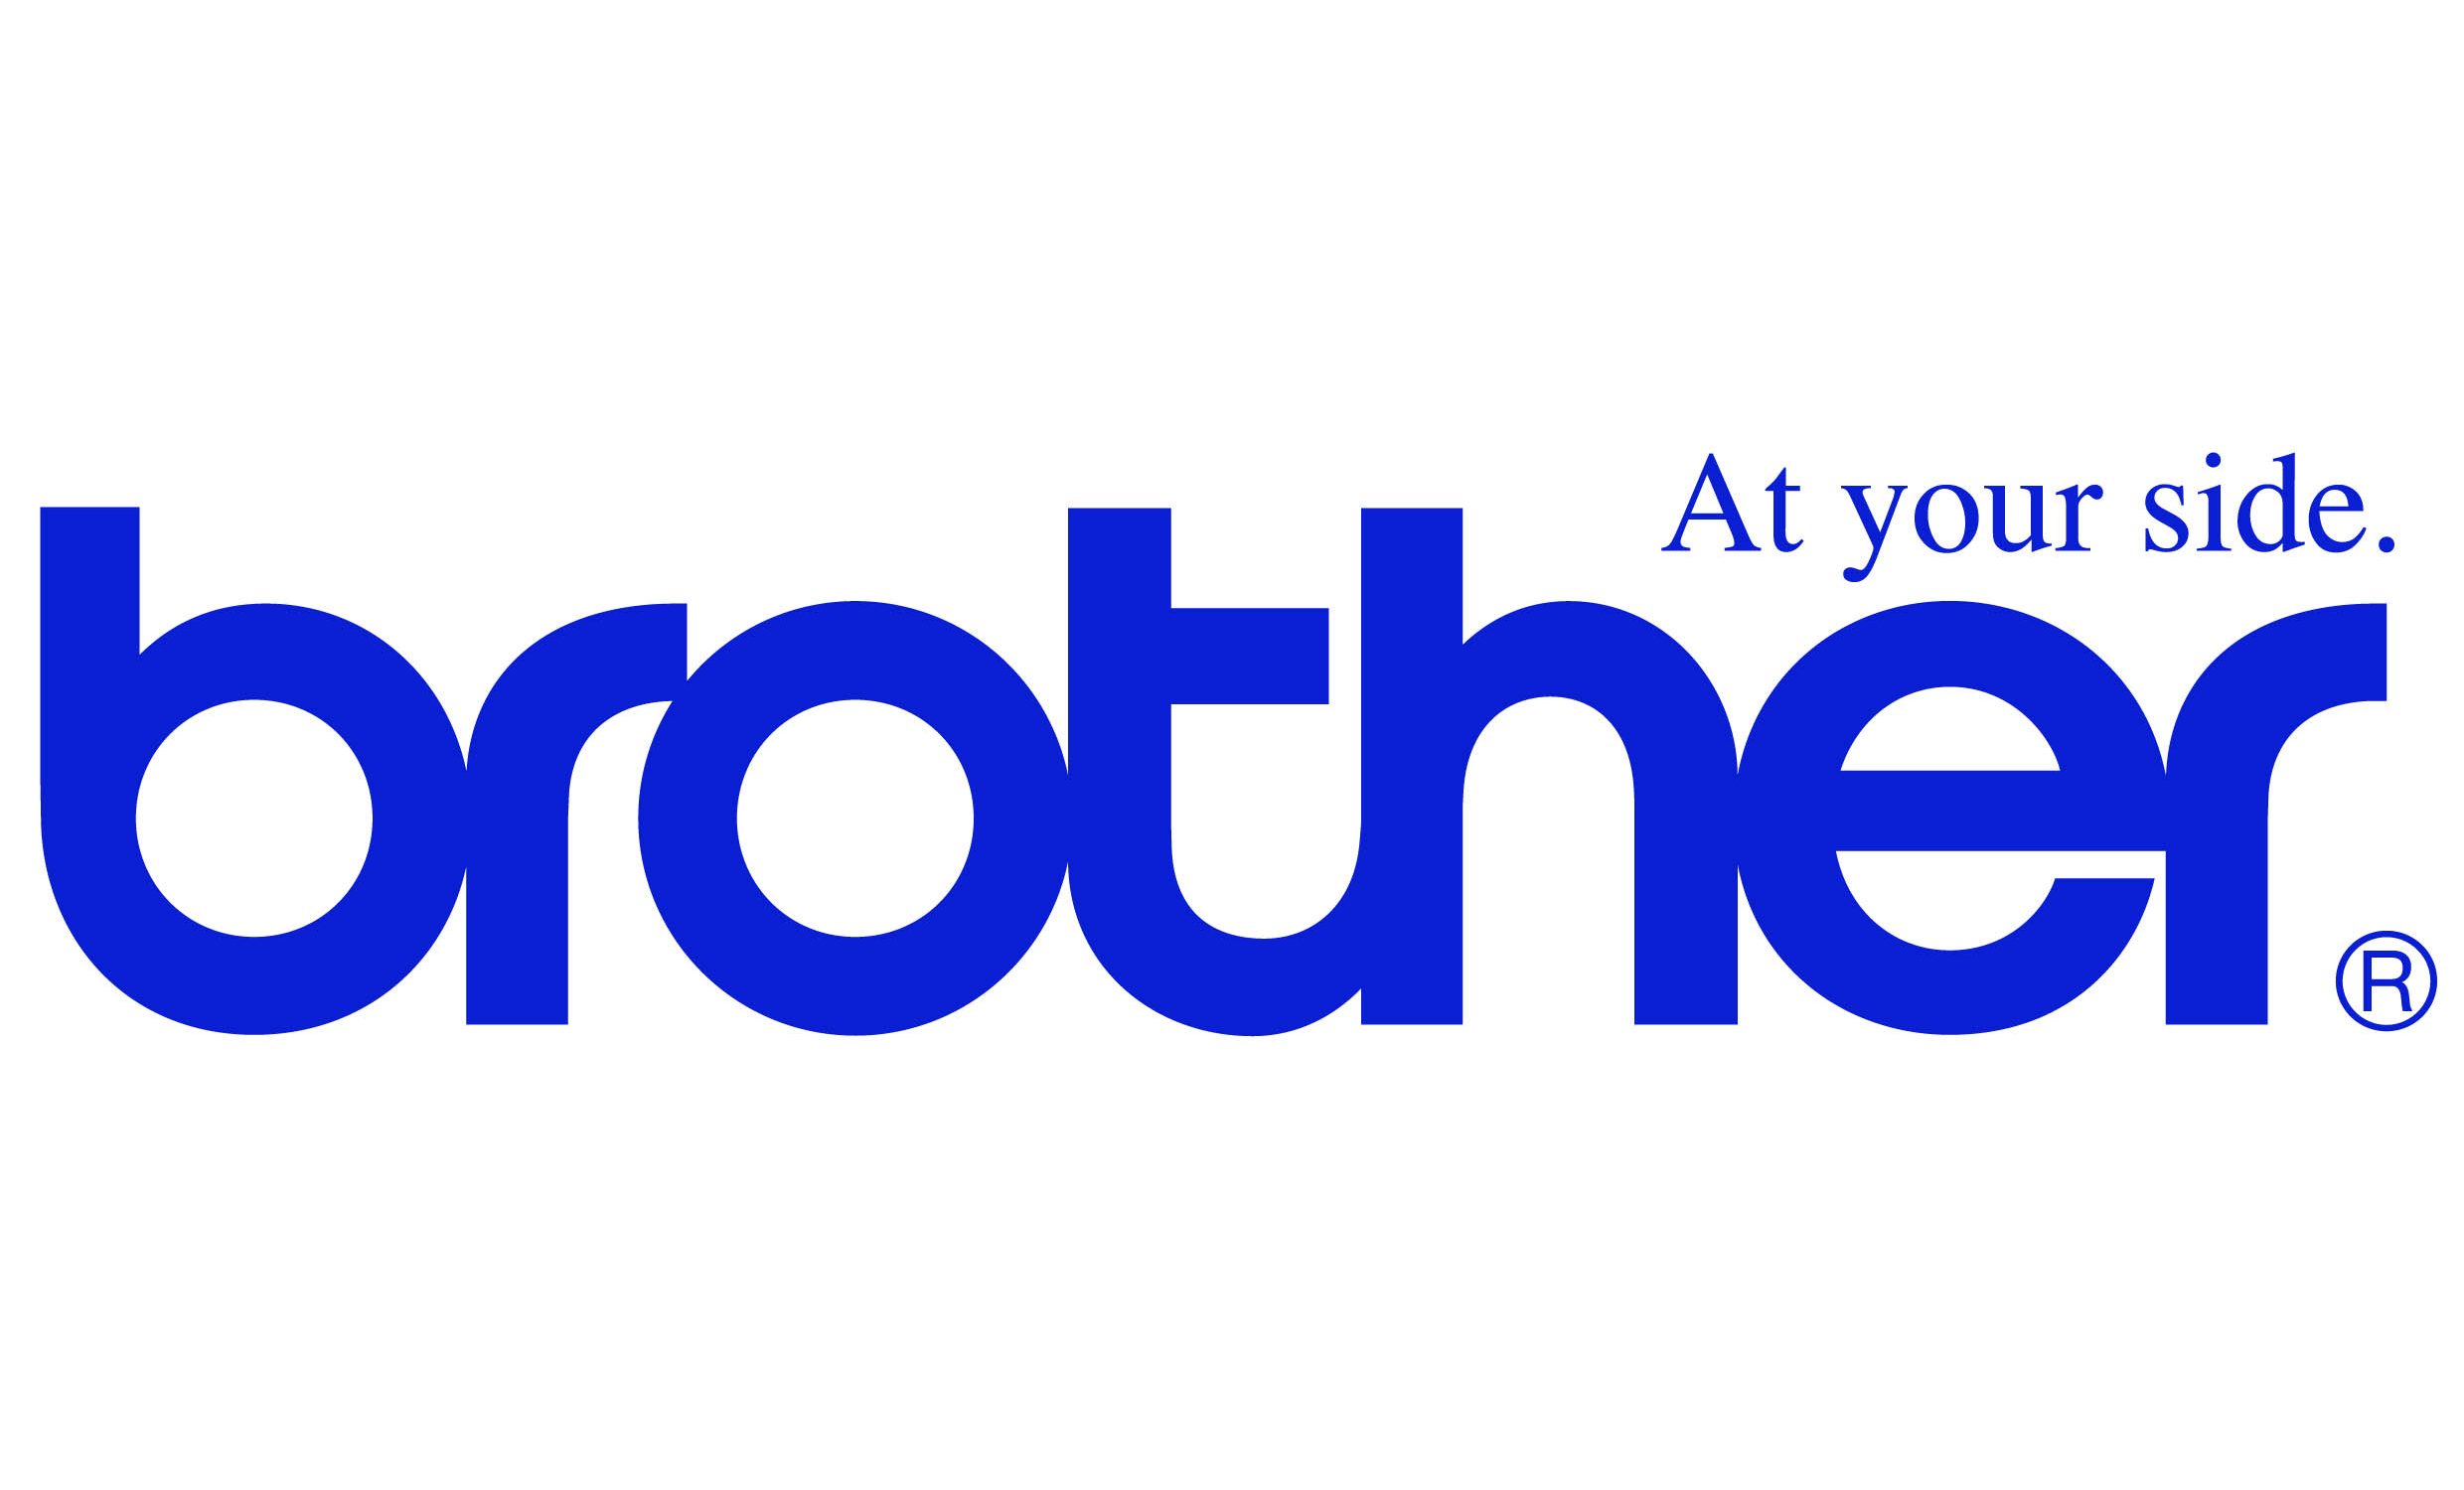 brother sewing machine logo